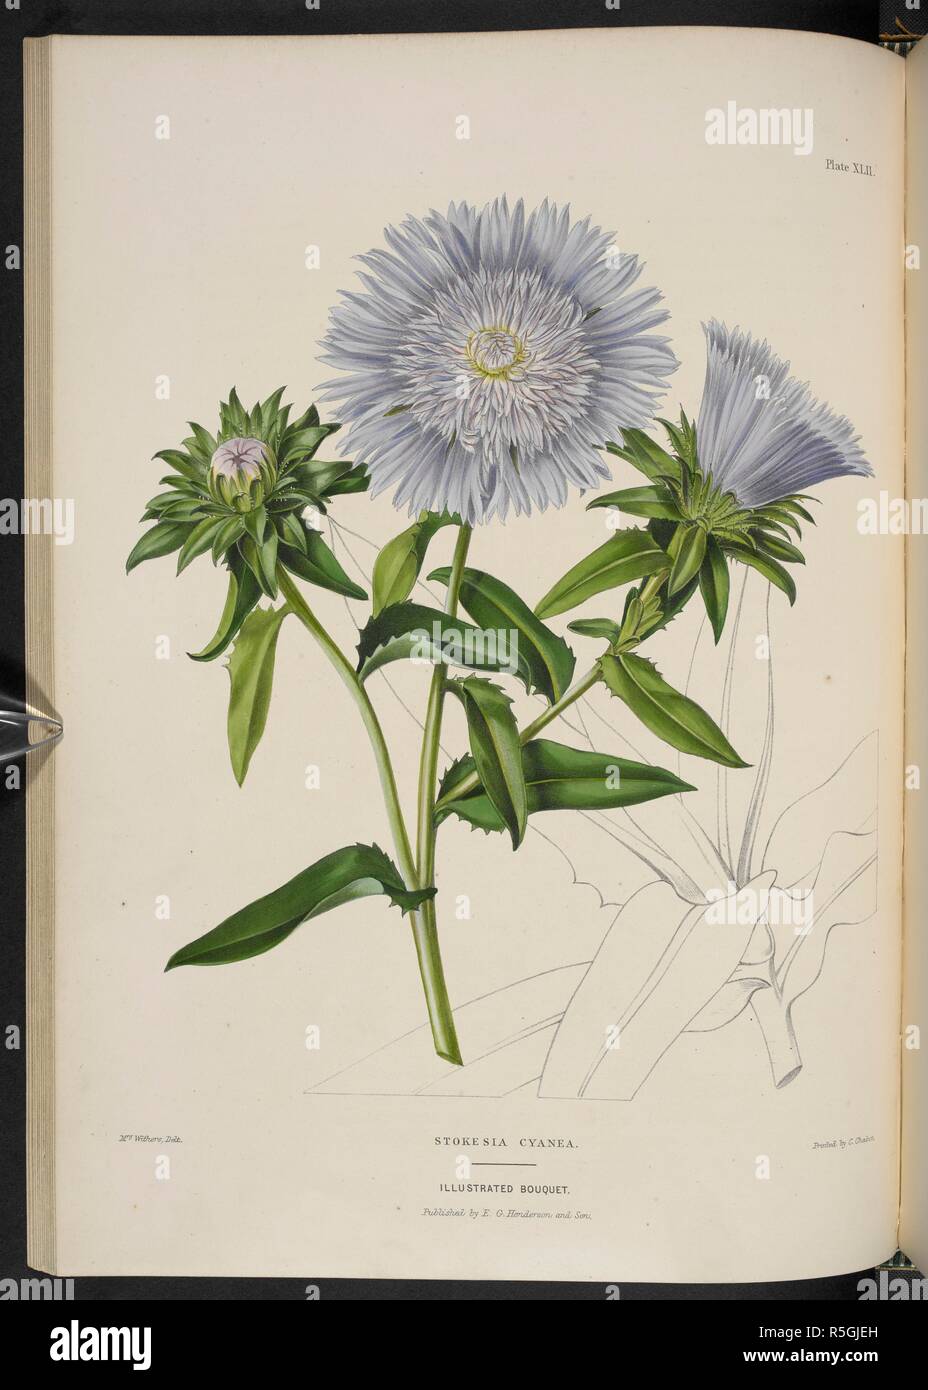 Stokesia cyanea. A member of the Sunflower Family. The Illustrated Bouquet, consisting of figures, with descriptions of new flowers. London, 1857-64. Source: 1823.c.13 plate 42. Author: Henderson, Edward George. Withers, Mrs. Stock Photo